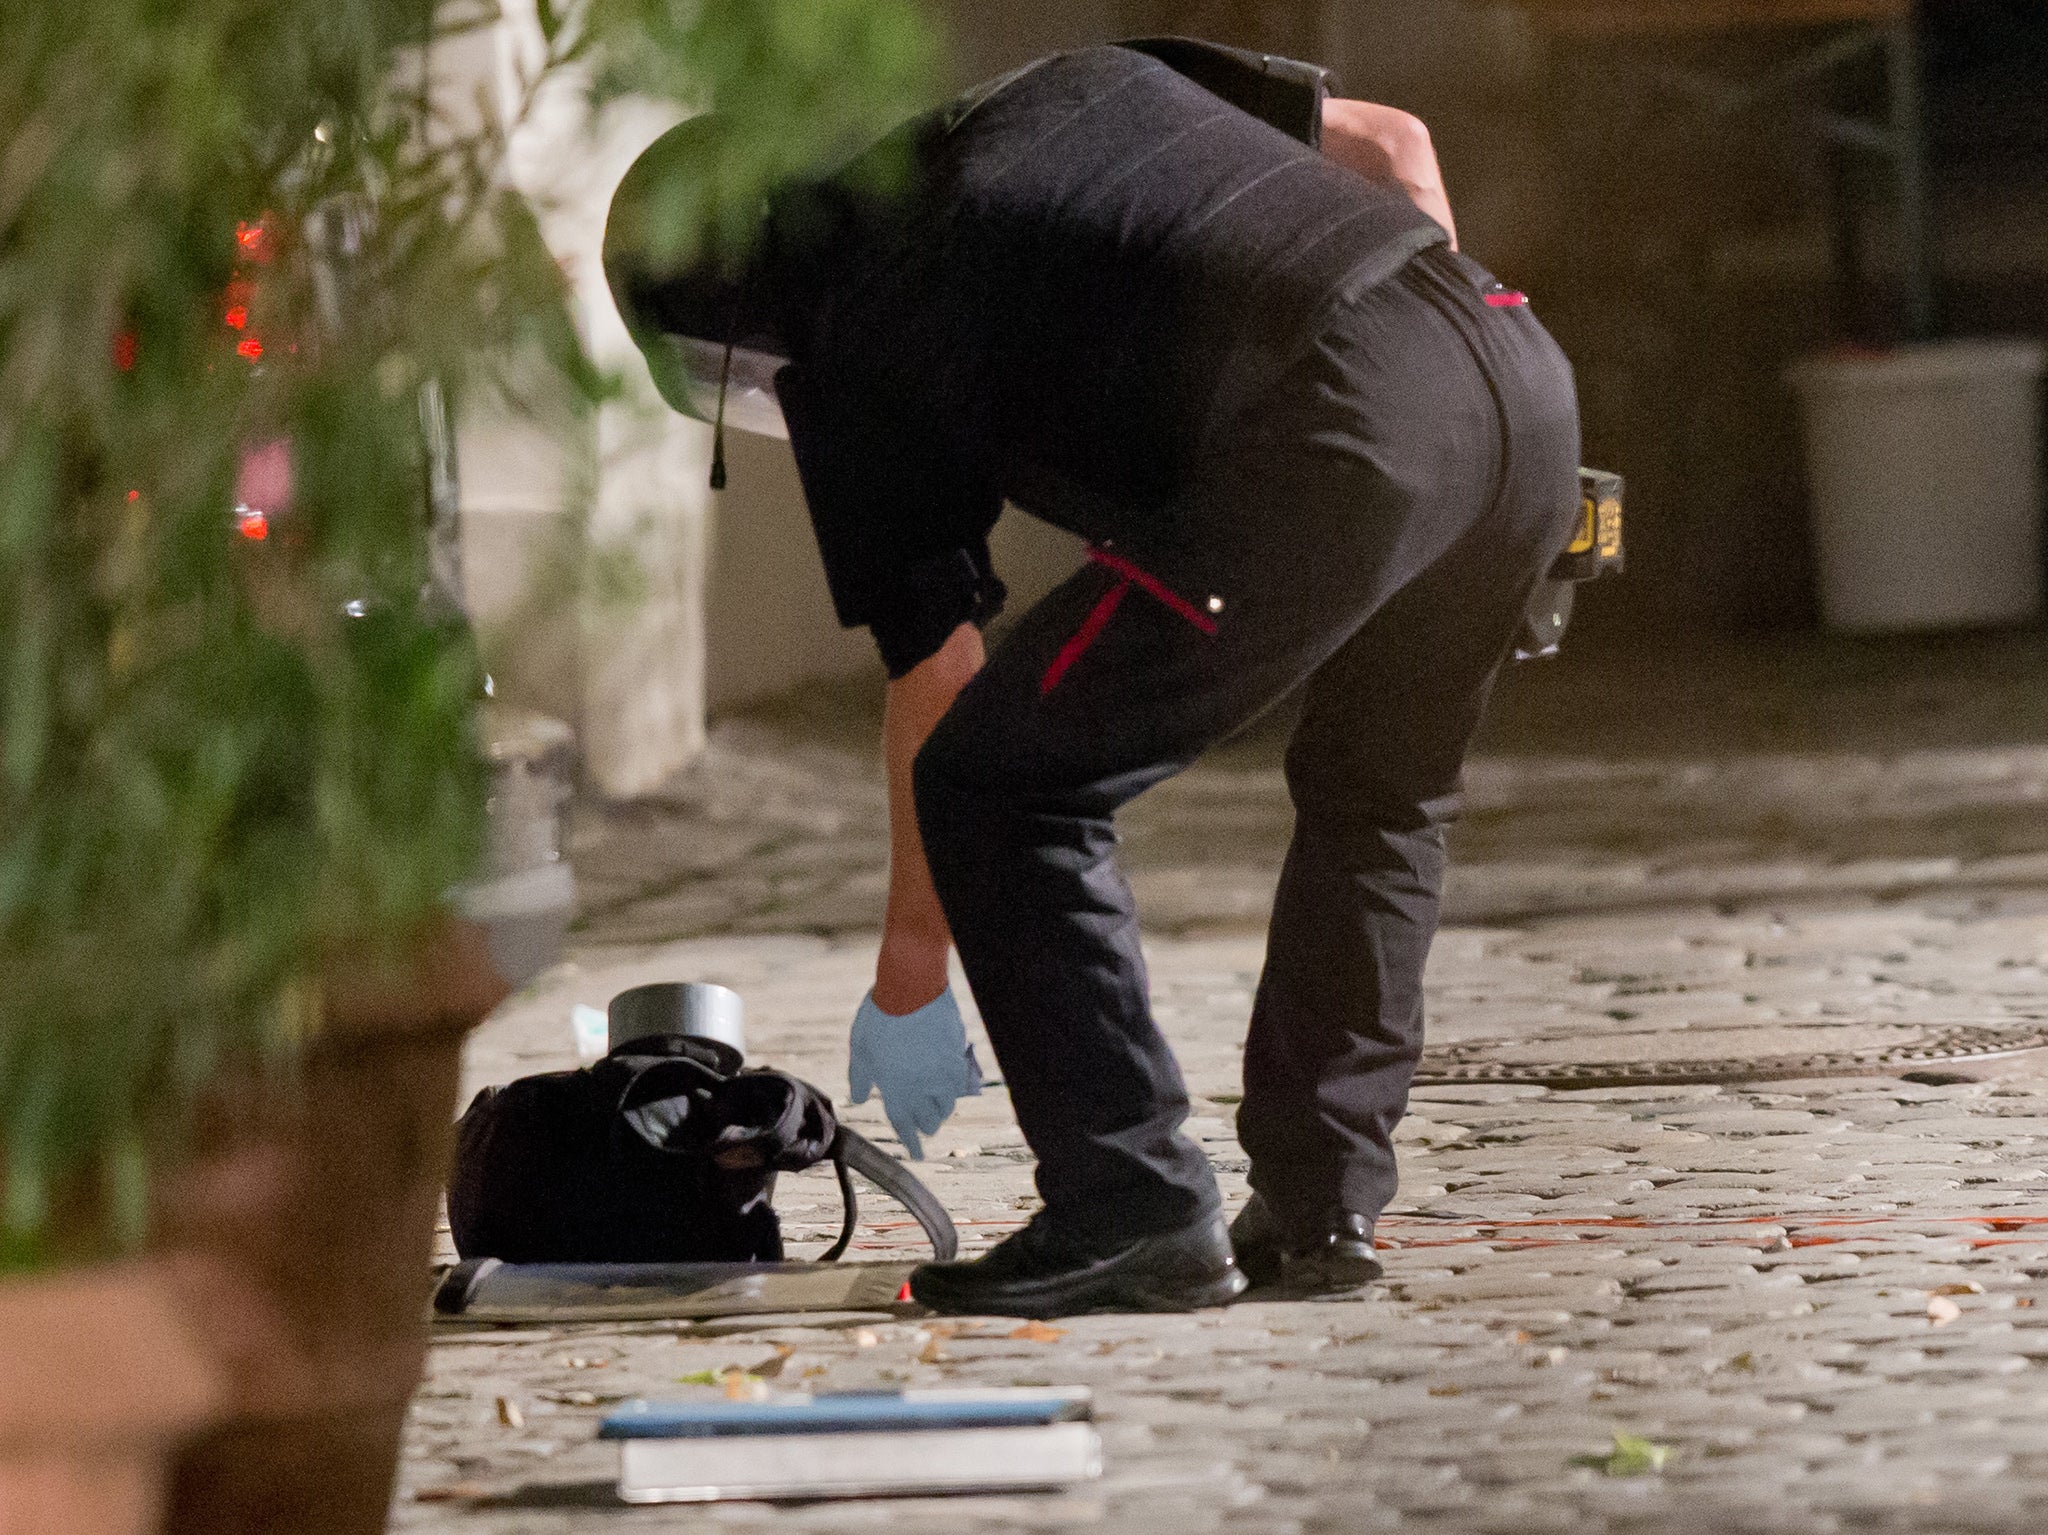 A police officer inspects a backpack used to carry an explosive device at the scene of the attack in Ansbach